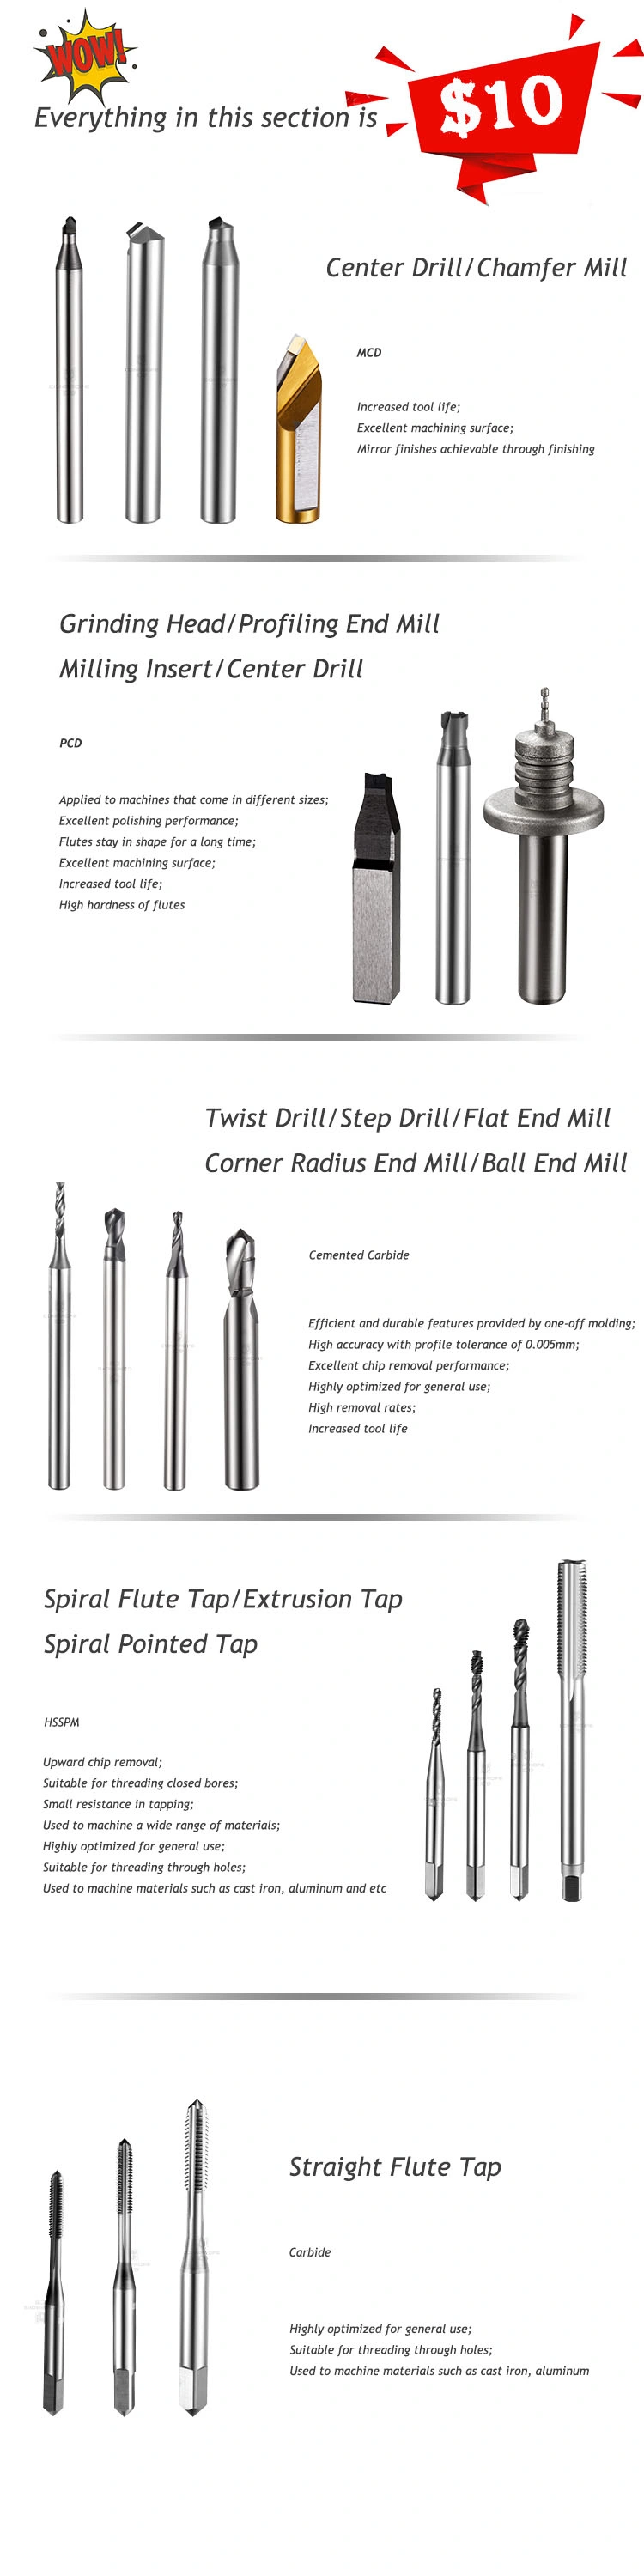 Ball Nose Cutter Cemented Carbide 1MM Ball End Mill Tools In CNC Lathe Machine